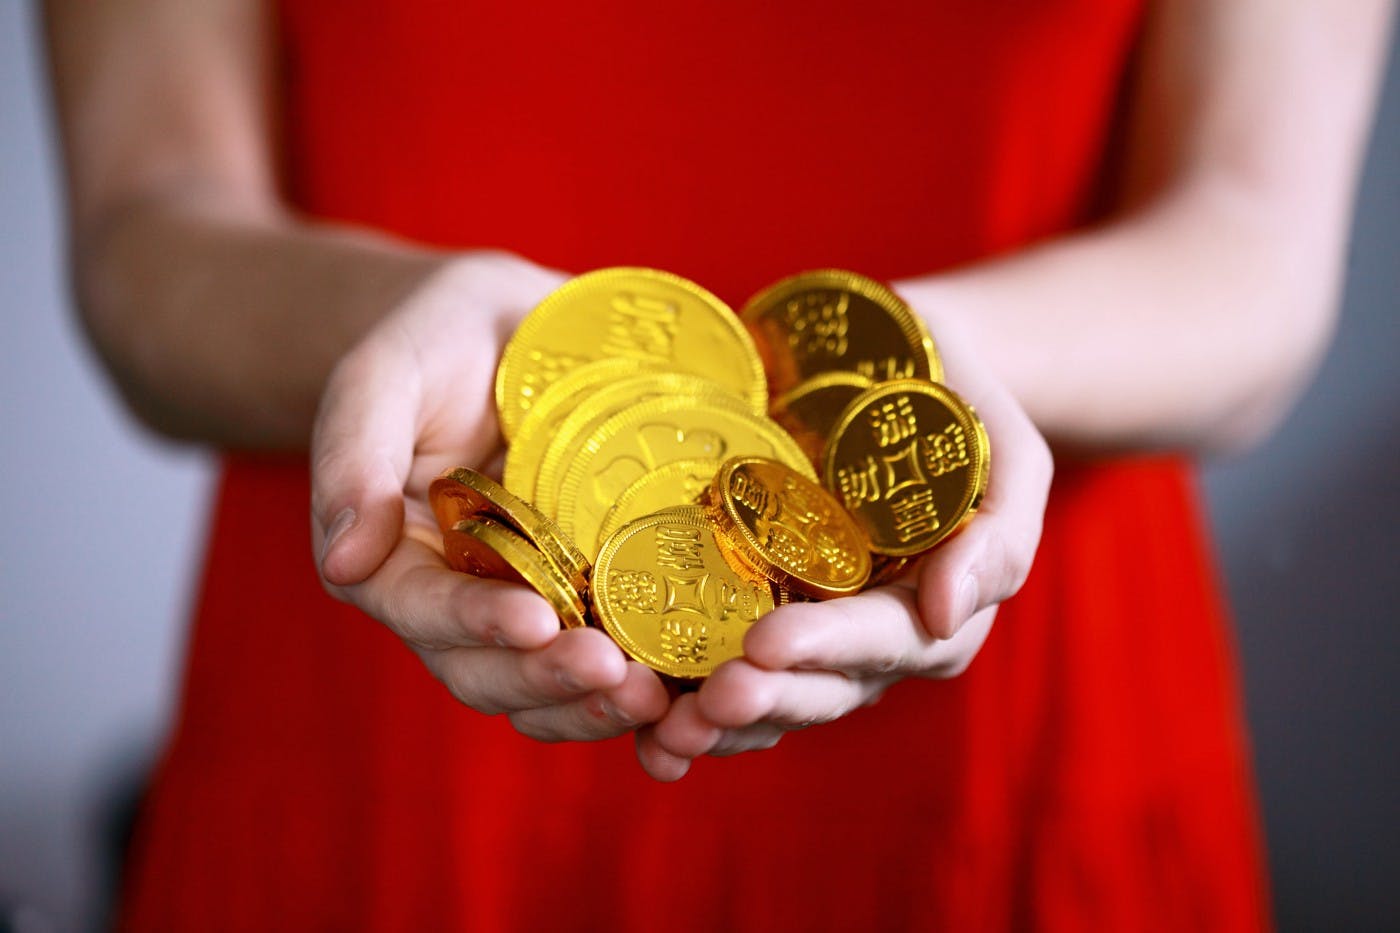 person holding gold-colored coins